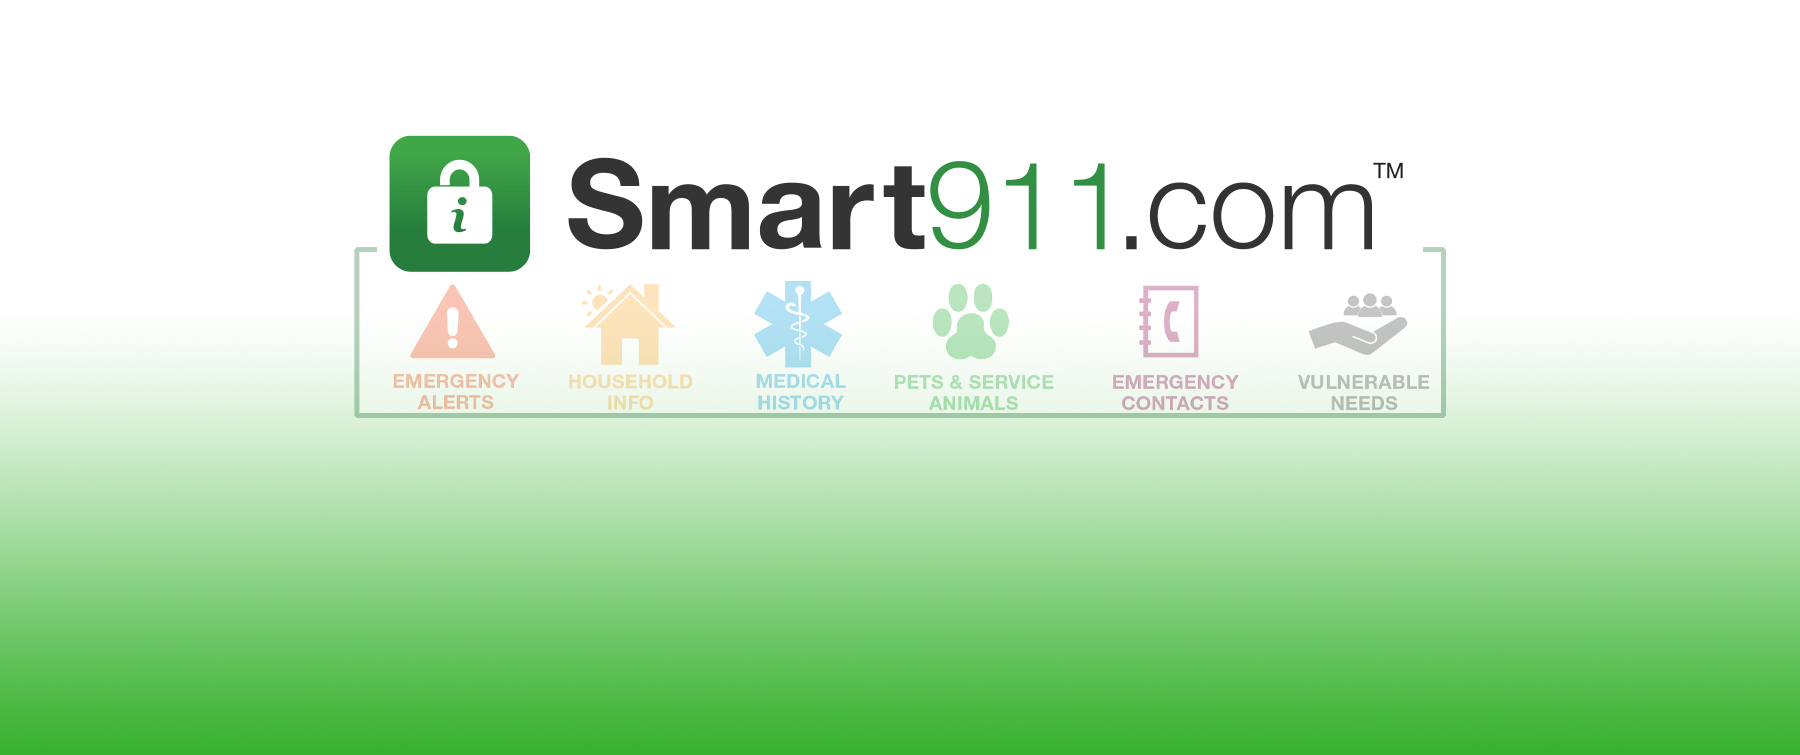 Smart911 Logo with Emergency Alert Icons